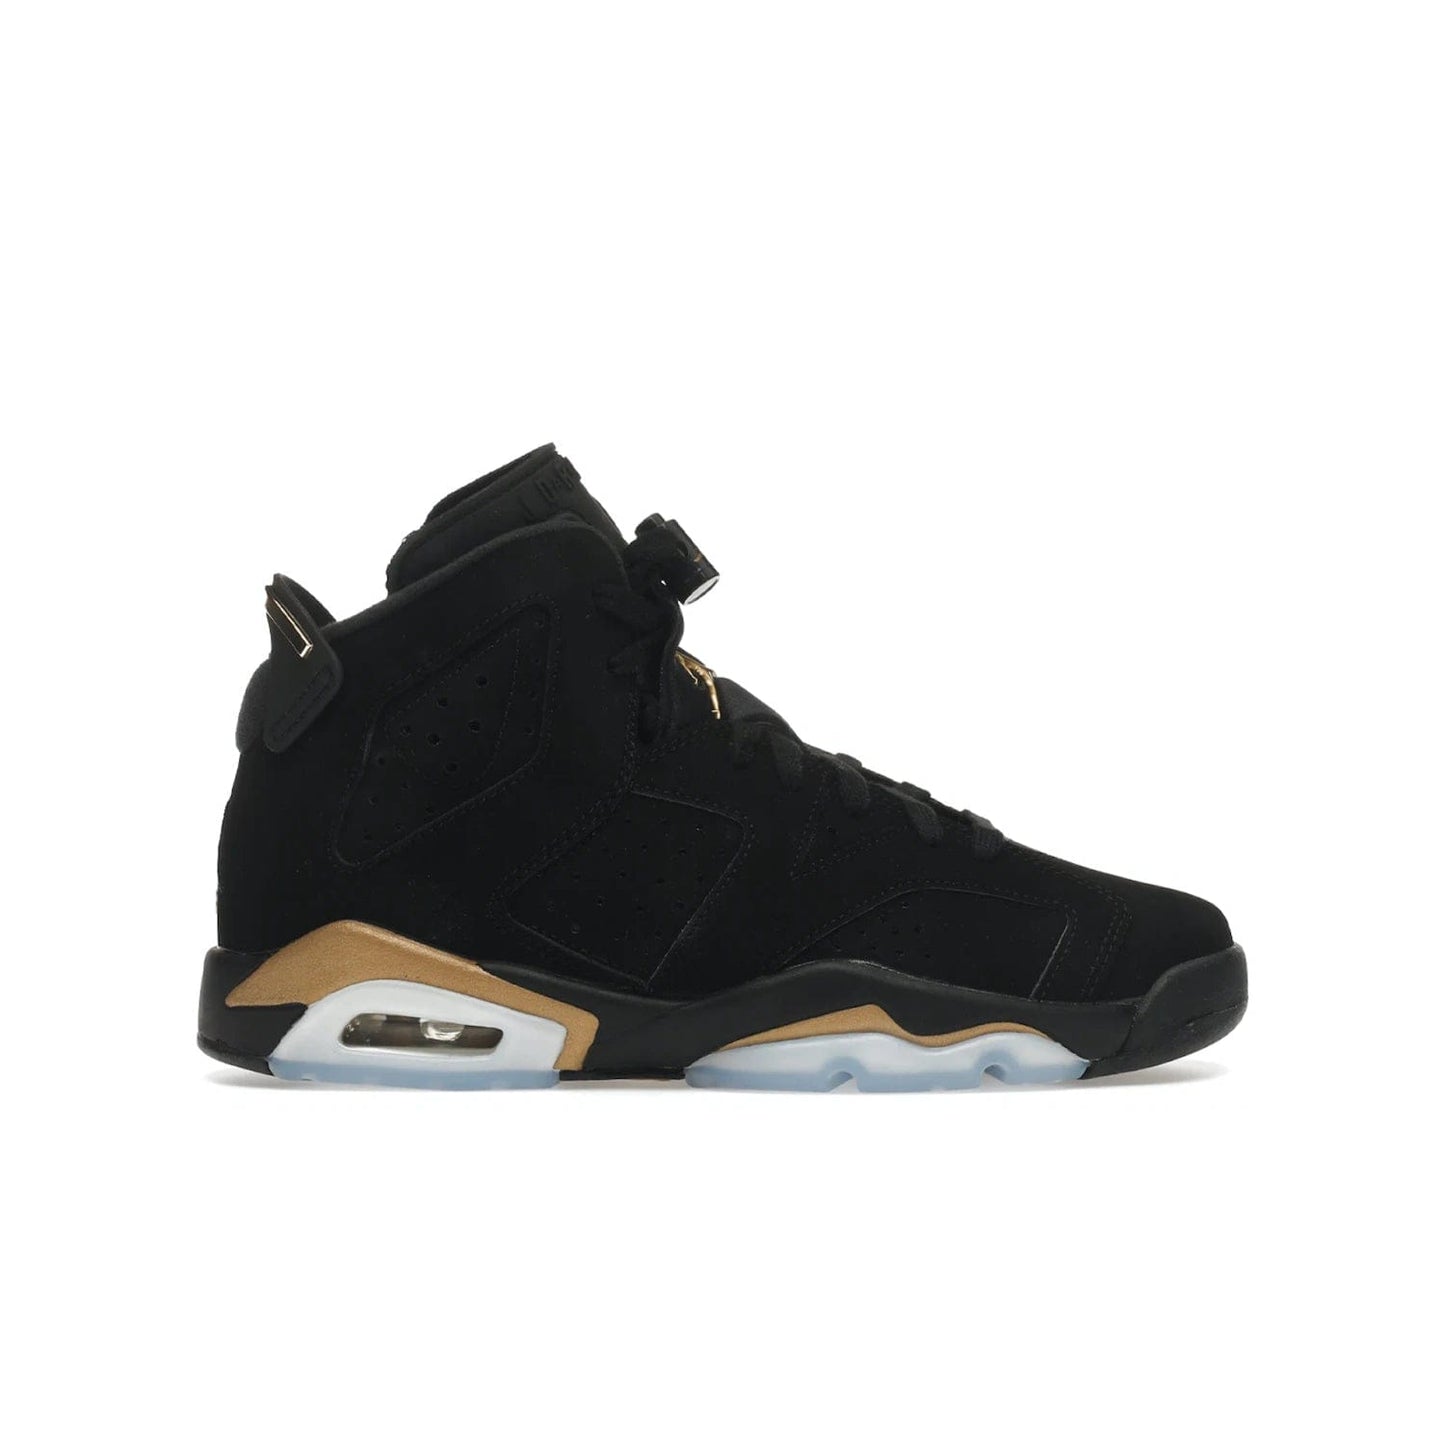 Jordan 6 Retro DMP 2020 (GS) - Image 1 - Only at www.BallersClubKickz.com - Grab the Air Jordan 6 Retro DMP 2020 GS Sneakers for a grand and enchanting look. Offering 100% nubuck leather, perforations throughout, Zoom Air technology & more. Available 18th April 2020. Shop now!